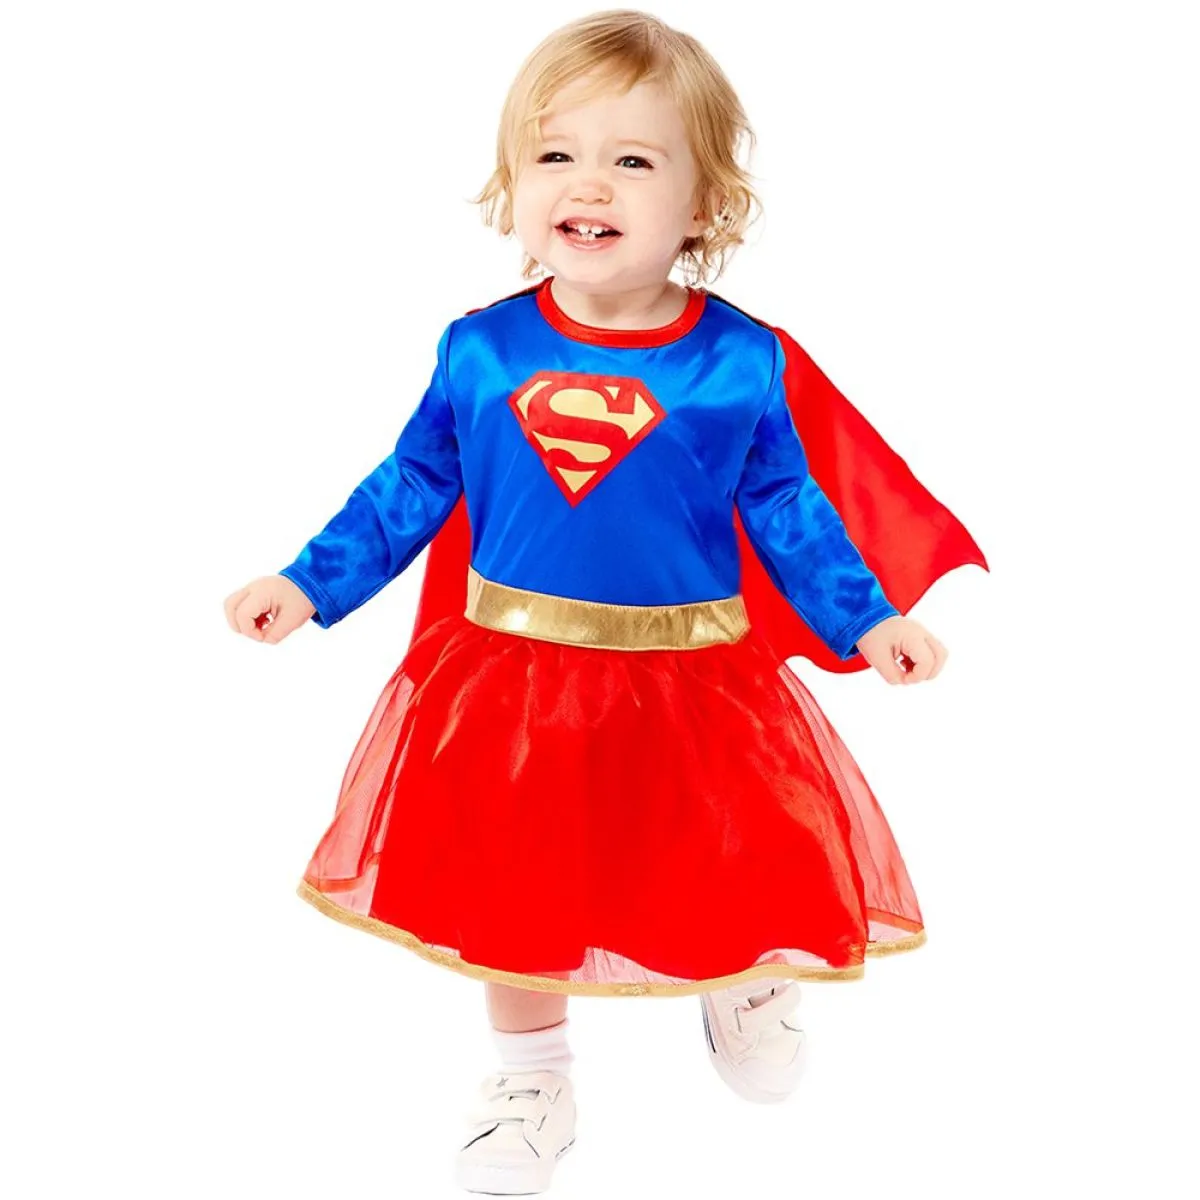 Little Supergirl - Baby and Toddler Costume